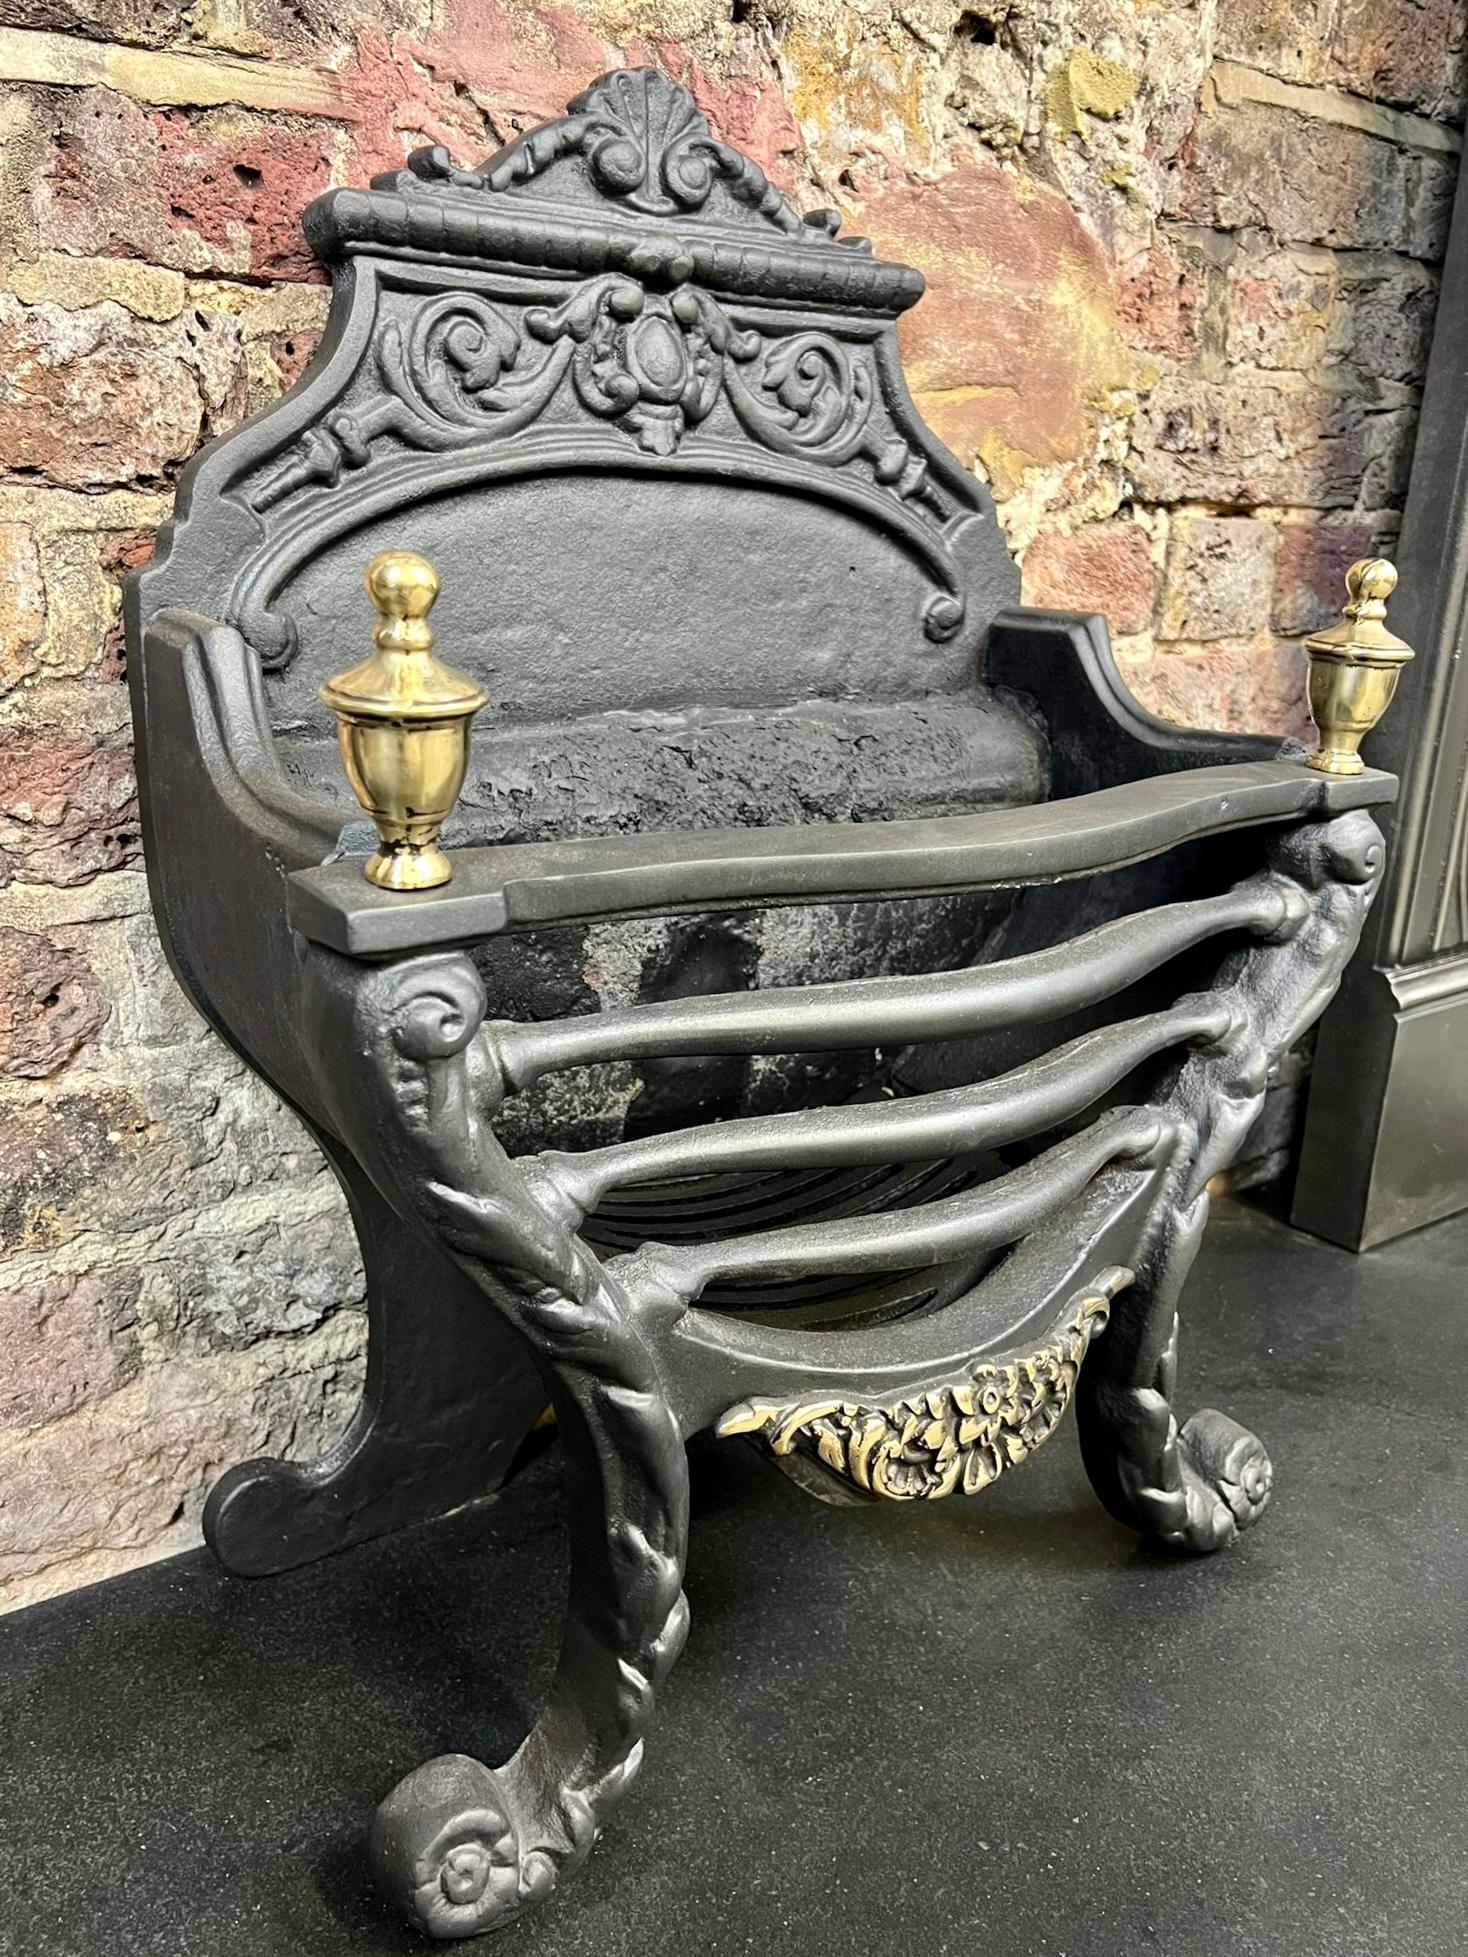 19th century cast iron & brass fireplace basket grate.
French Styled original victorian free standing fire basket & grate. 
This Typical French Styled Antique Basket Has A Traditional Blackened Finish With Brass Finials And Decorative Brass Foral